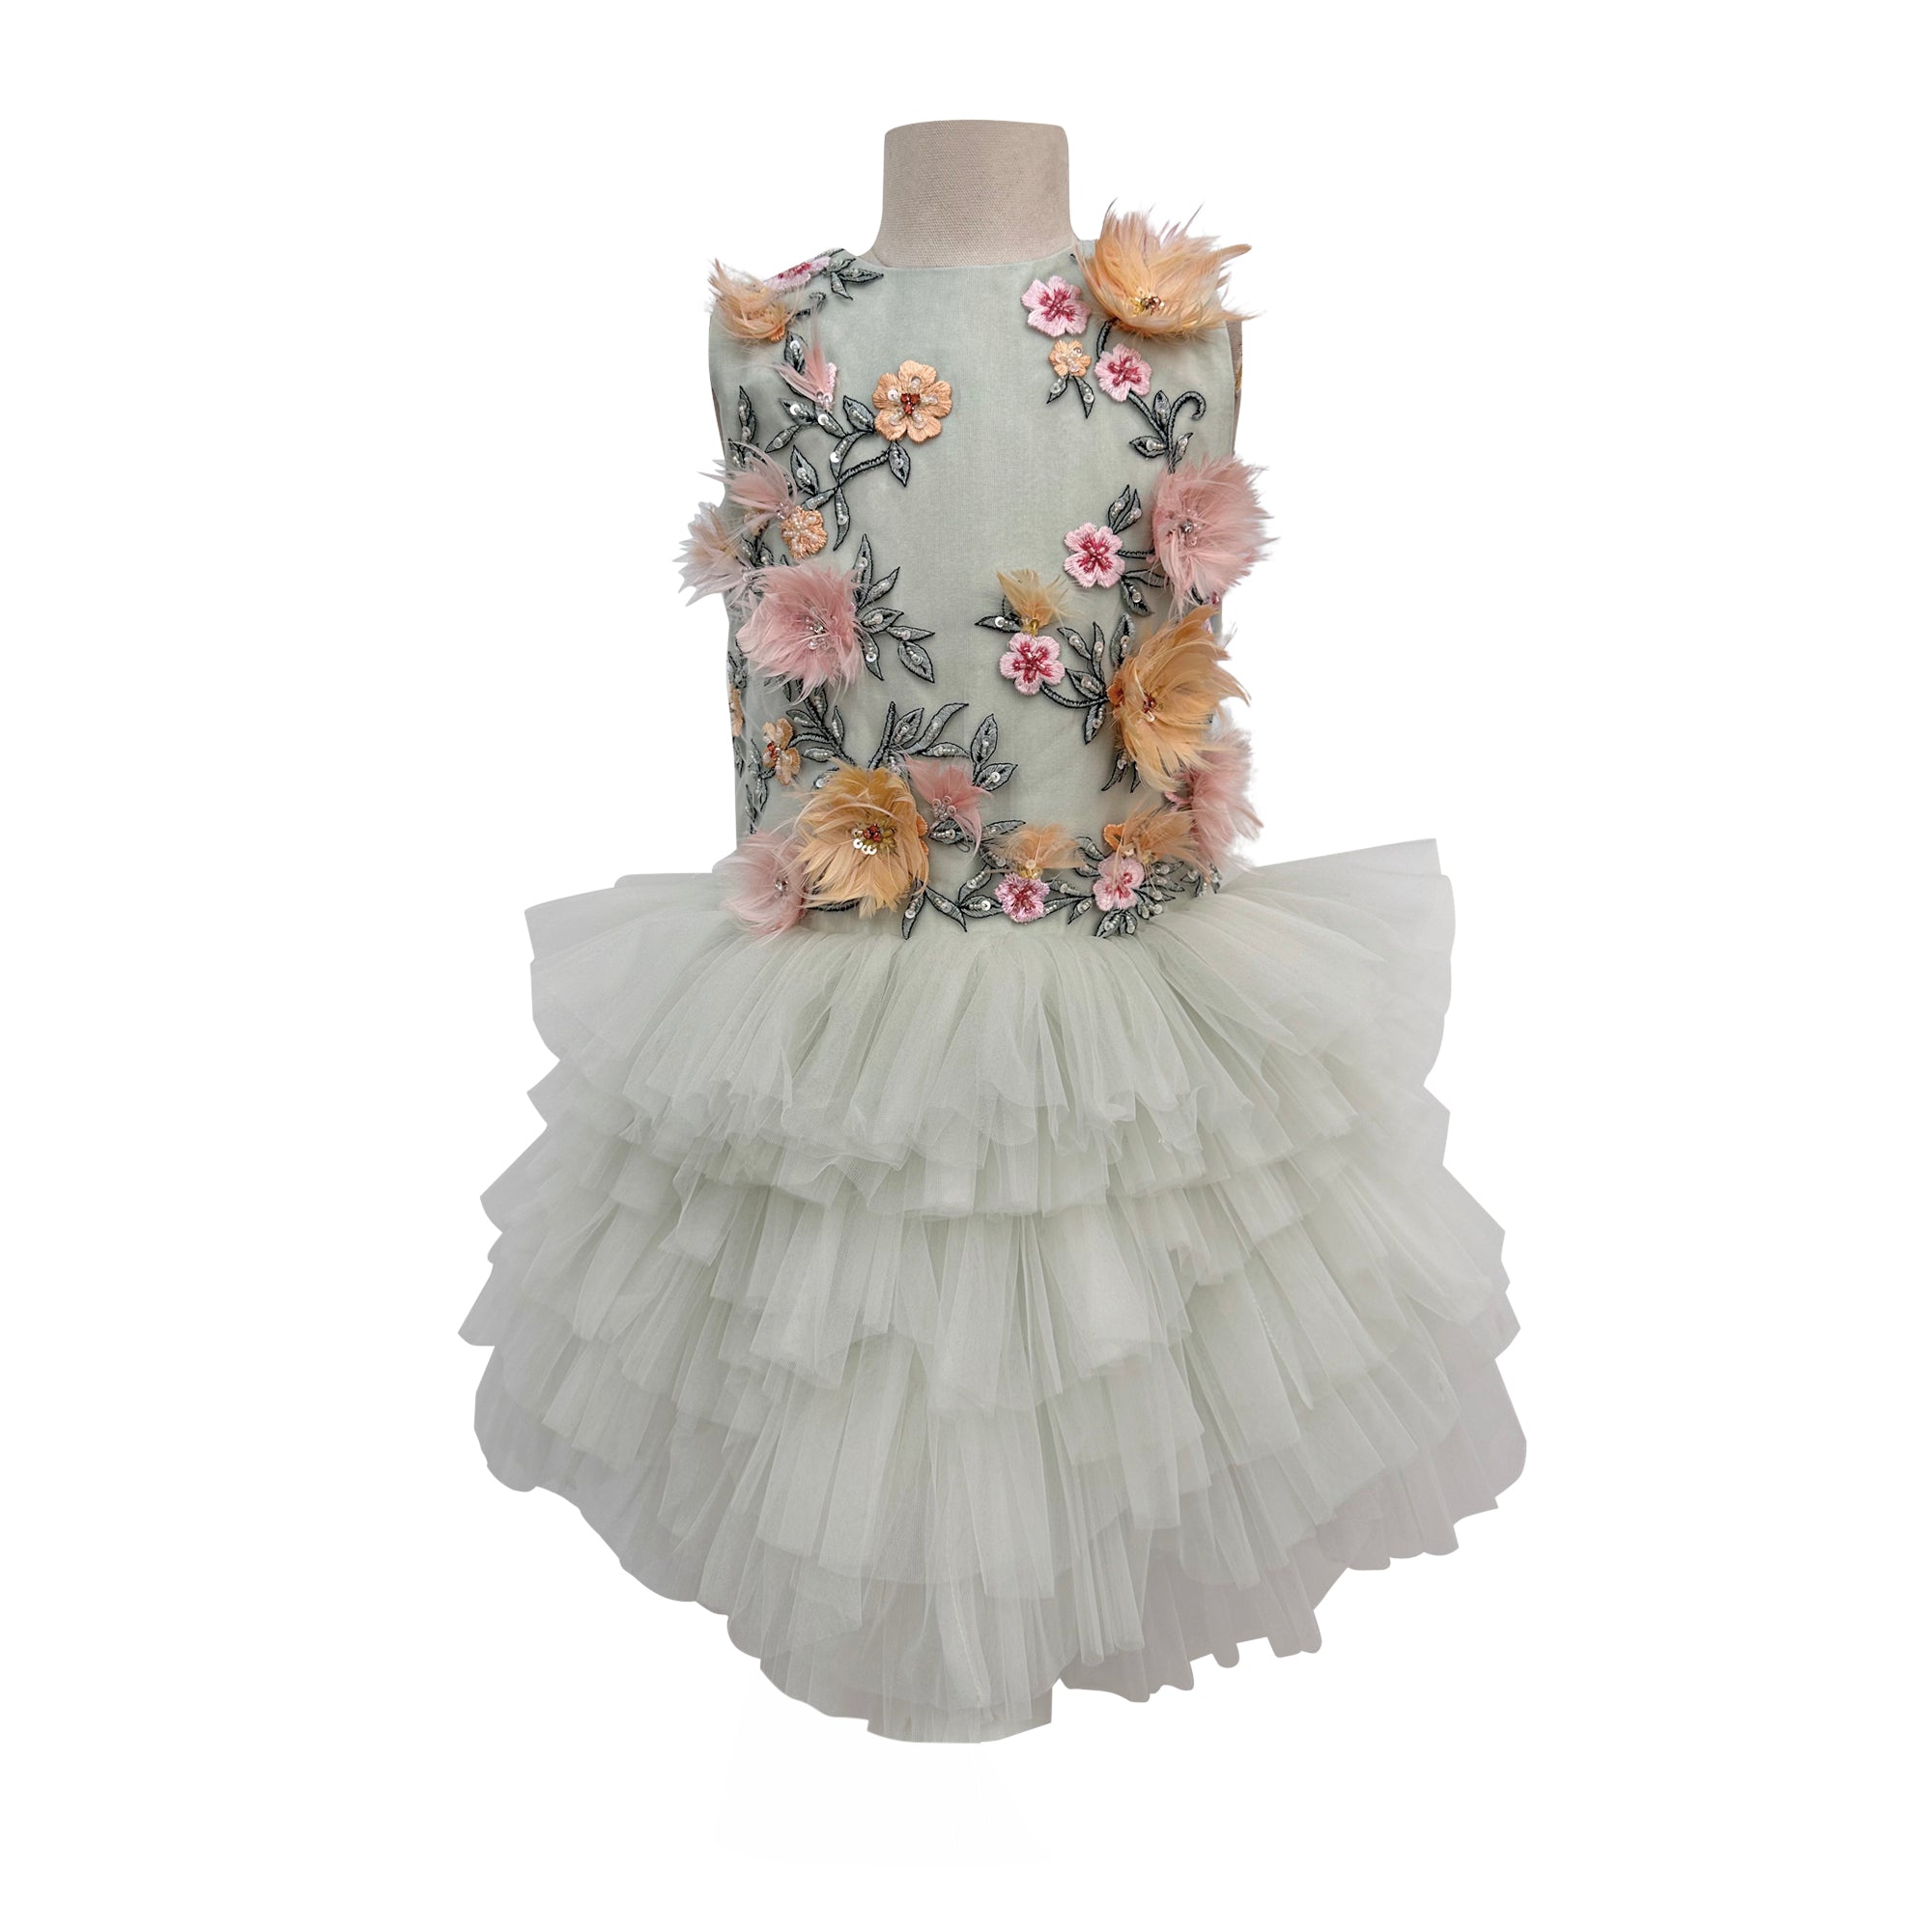 The Enchanted Forest Dress